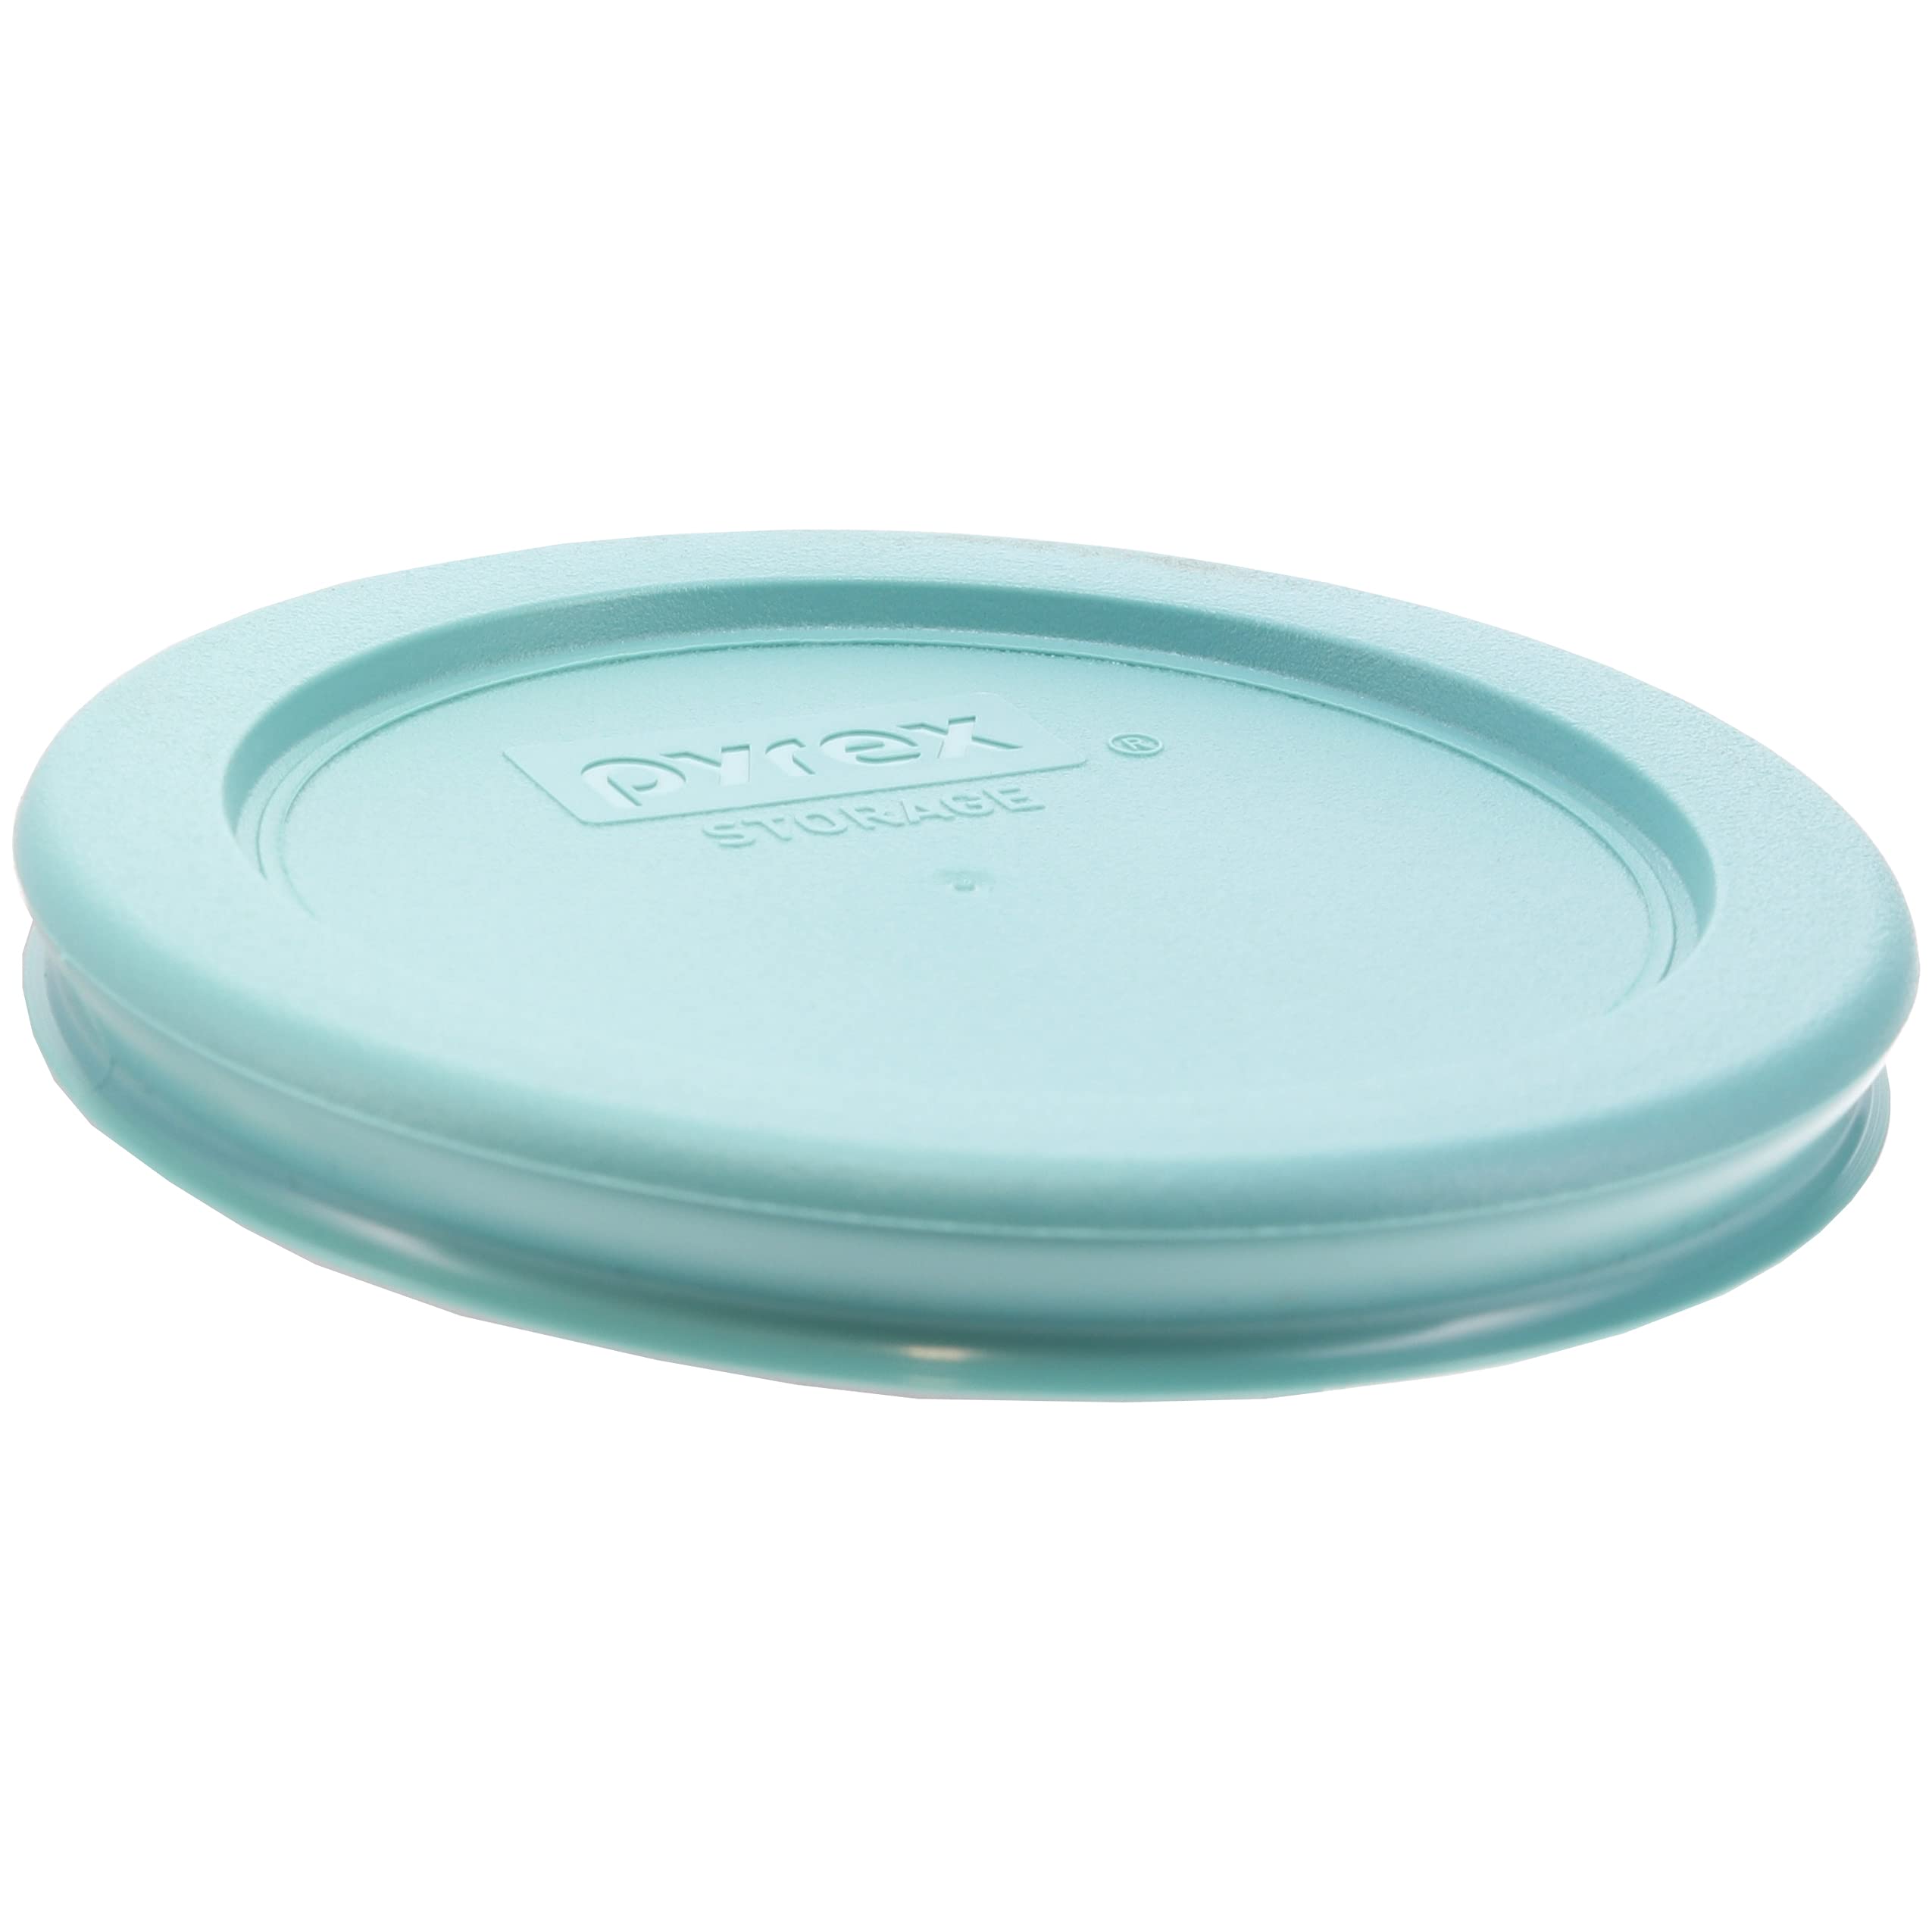 Pyrex 7202-PC Jade Dust Green Round Plastic Replacement Food Storage Lid, Made in USA - 2 pack